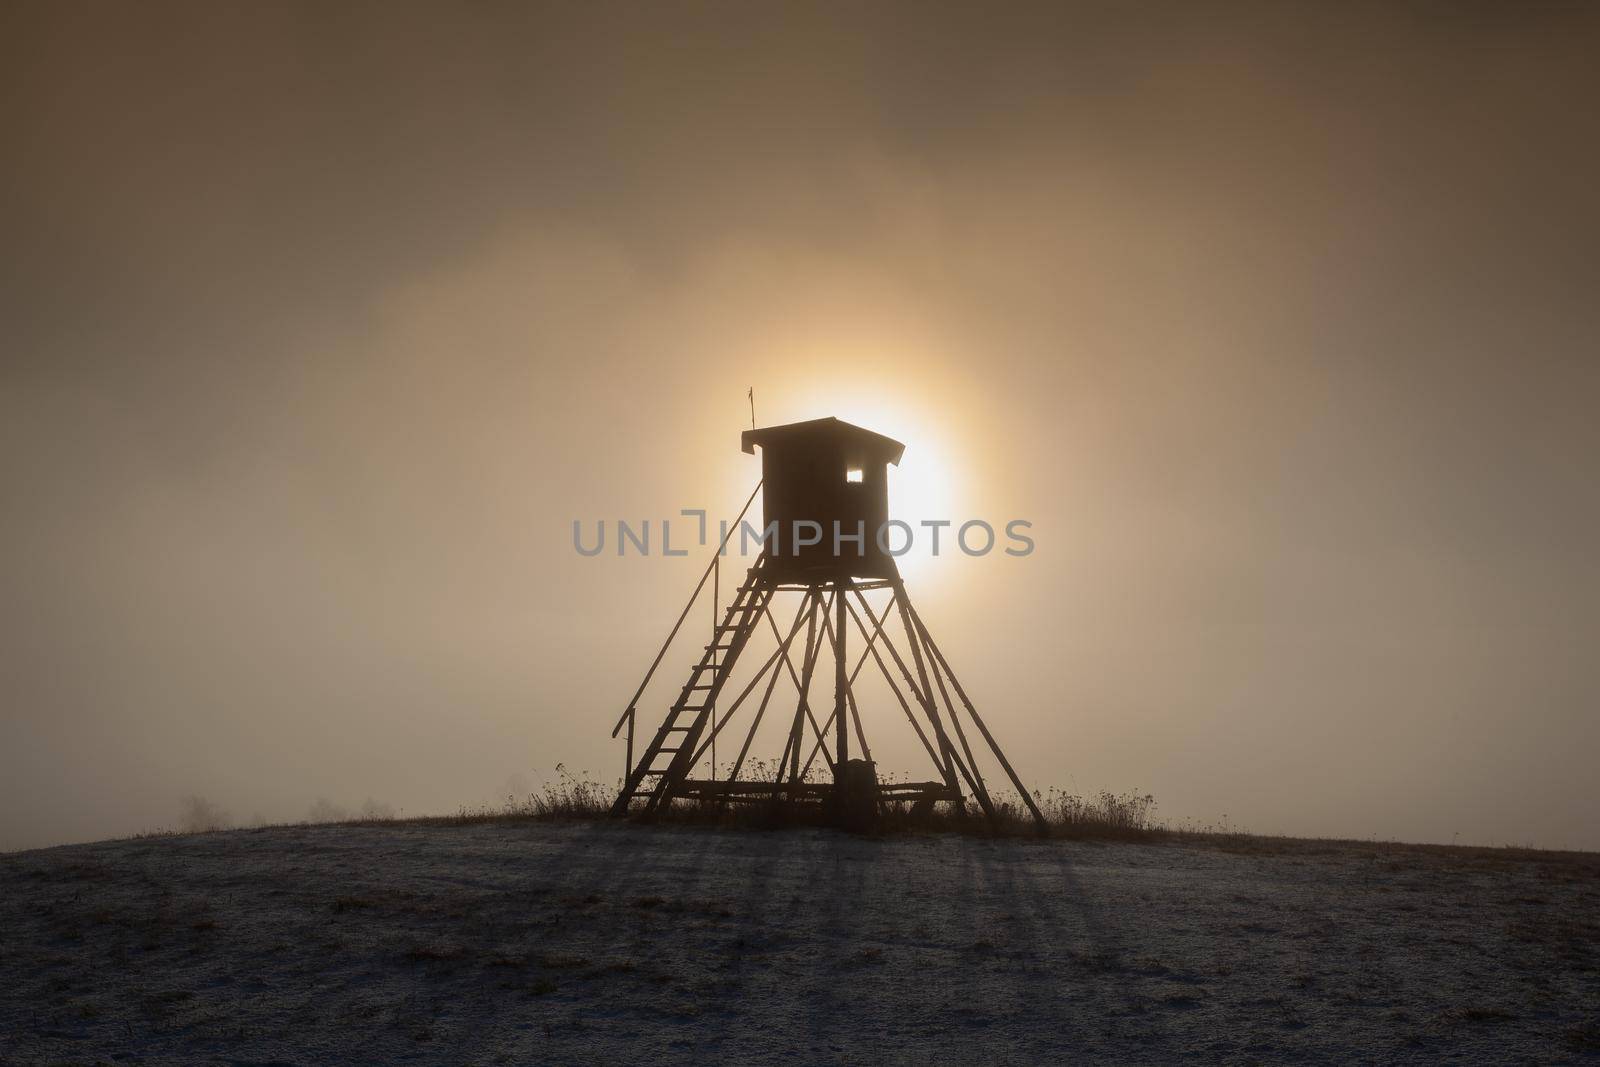 Lookout tower for hunting on the hill at sunrise. Winter scenery.